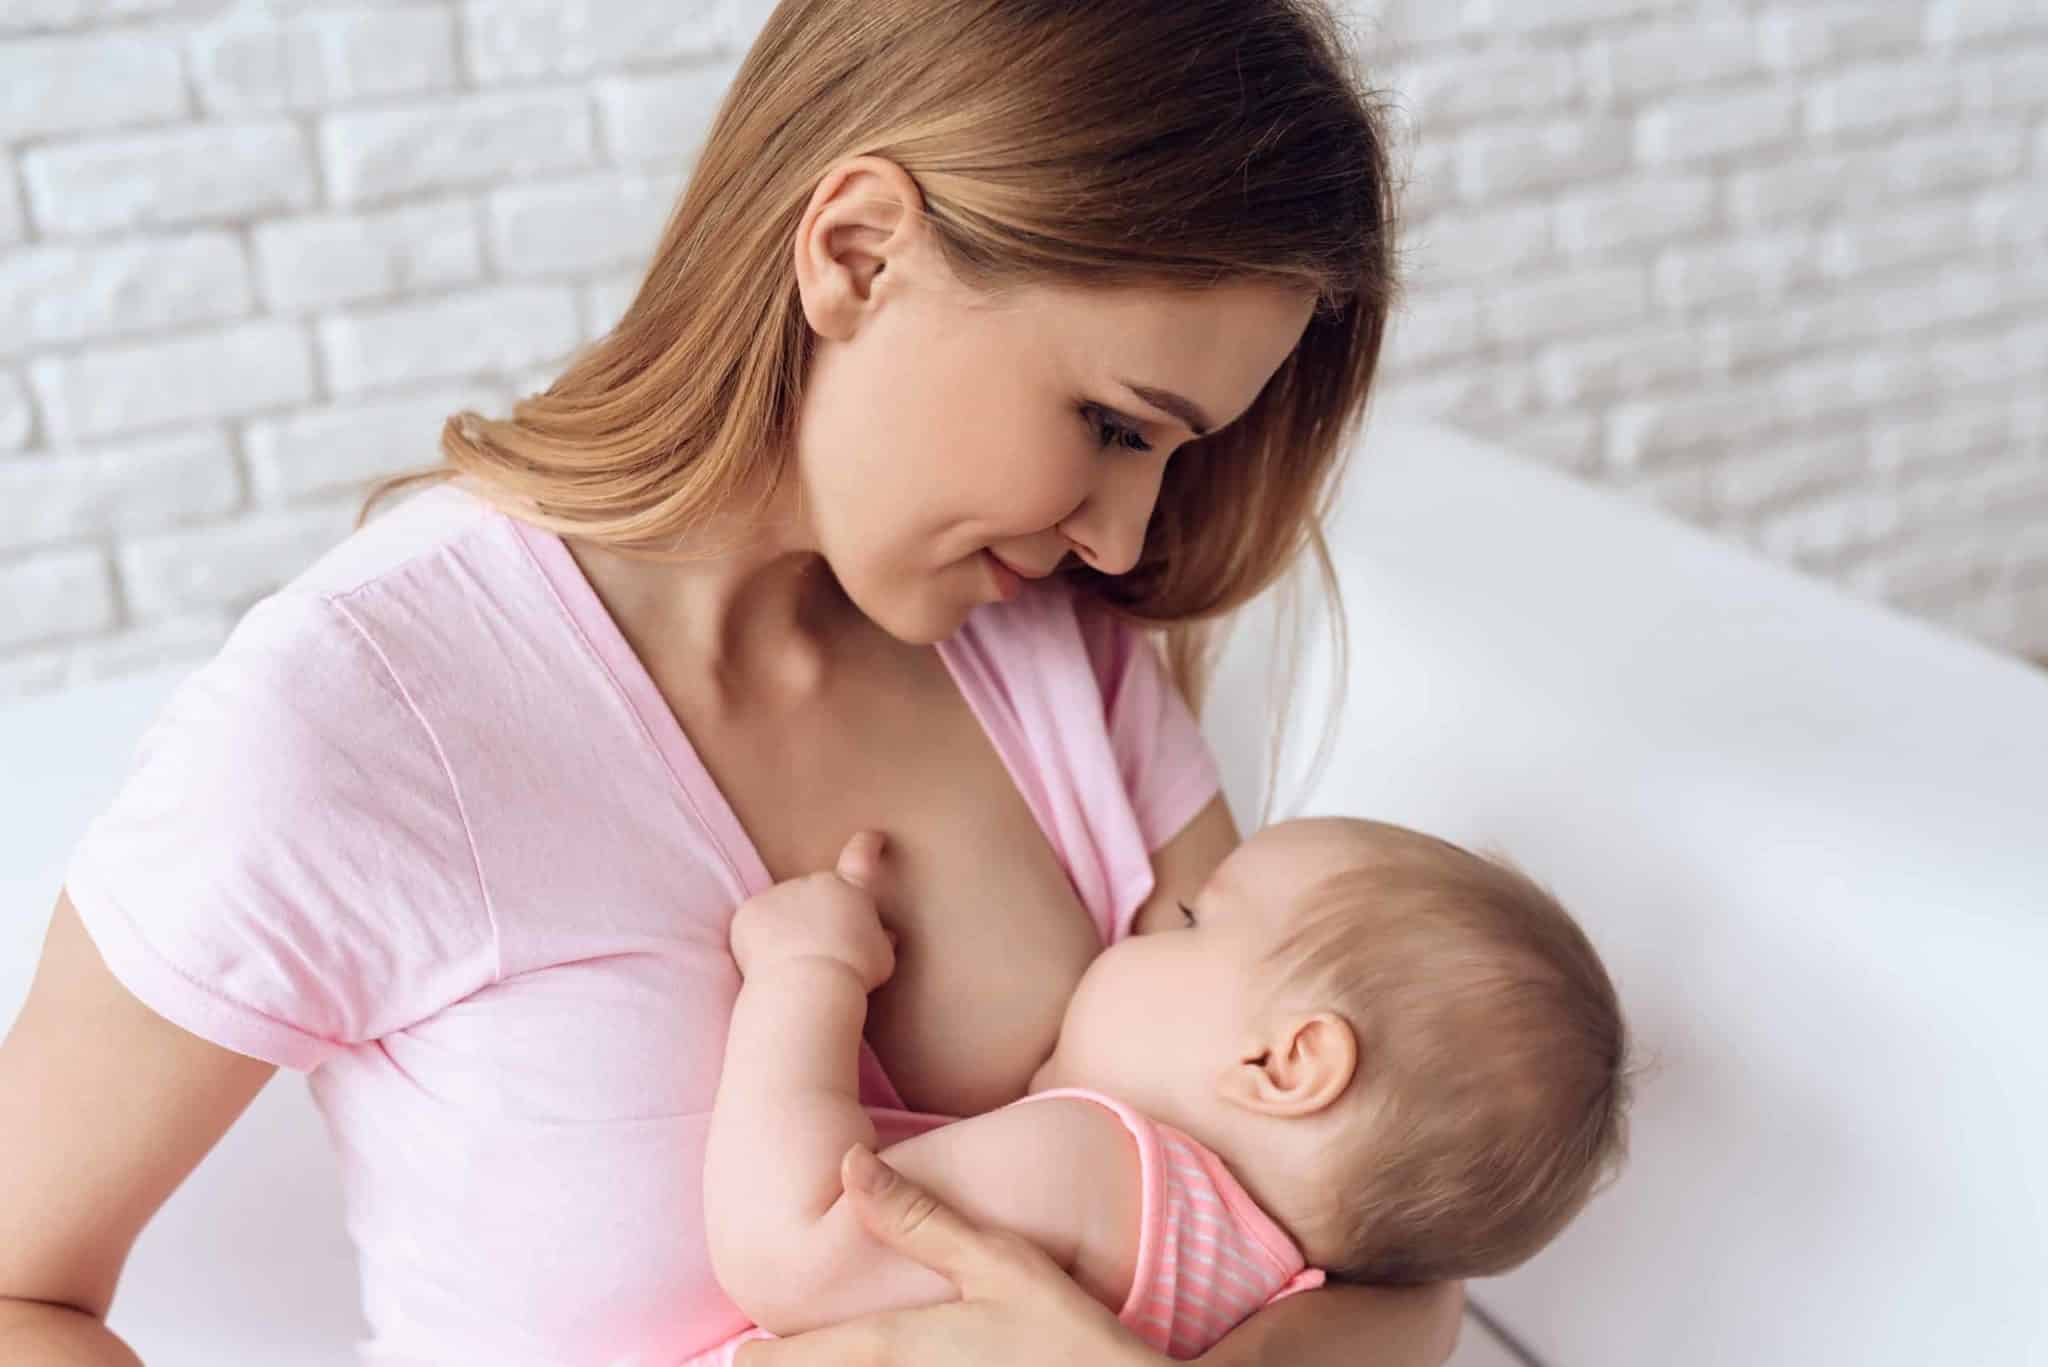 Breastfeeding with large breasts Breasts come in all shapes and sizes, and  all of them work just fine for breastfeeding. The size of a woman's  breasts, whether large or small, doesn't reflect their milk-making  capacity, nor how easy breastfeeding is